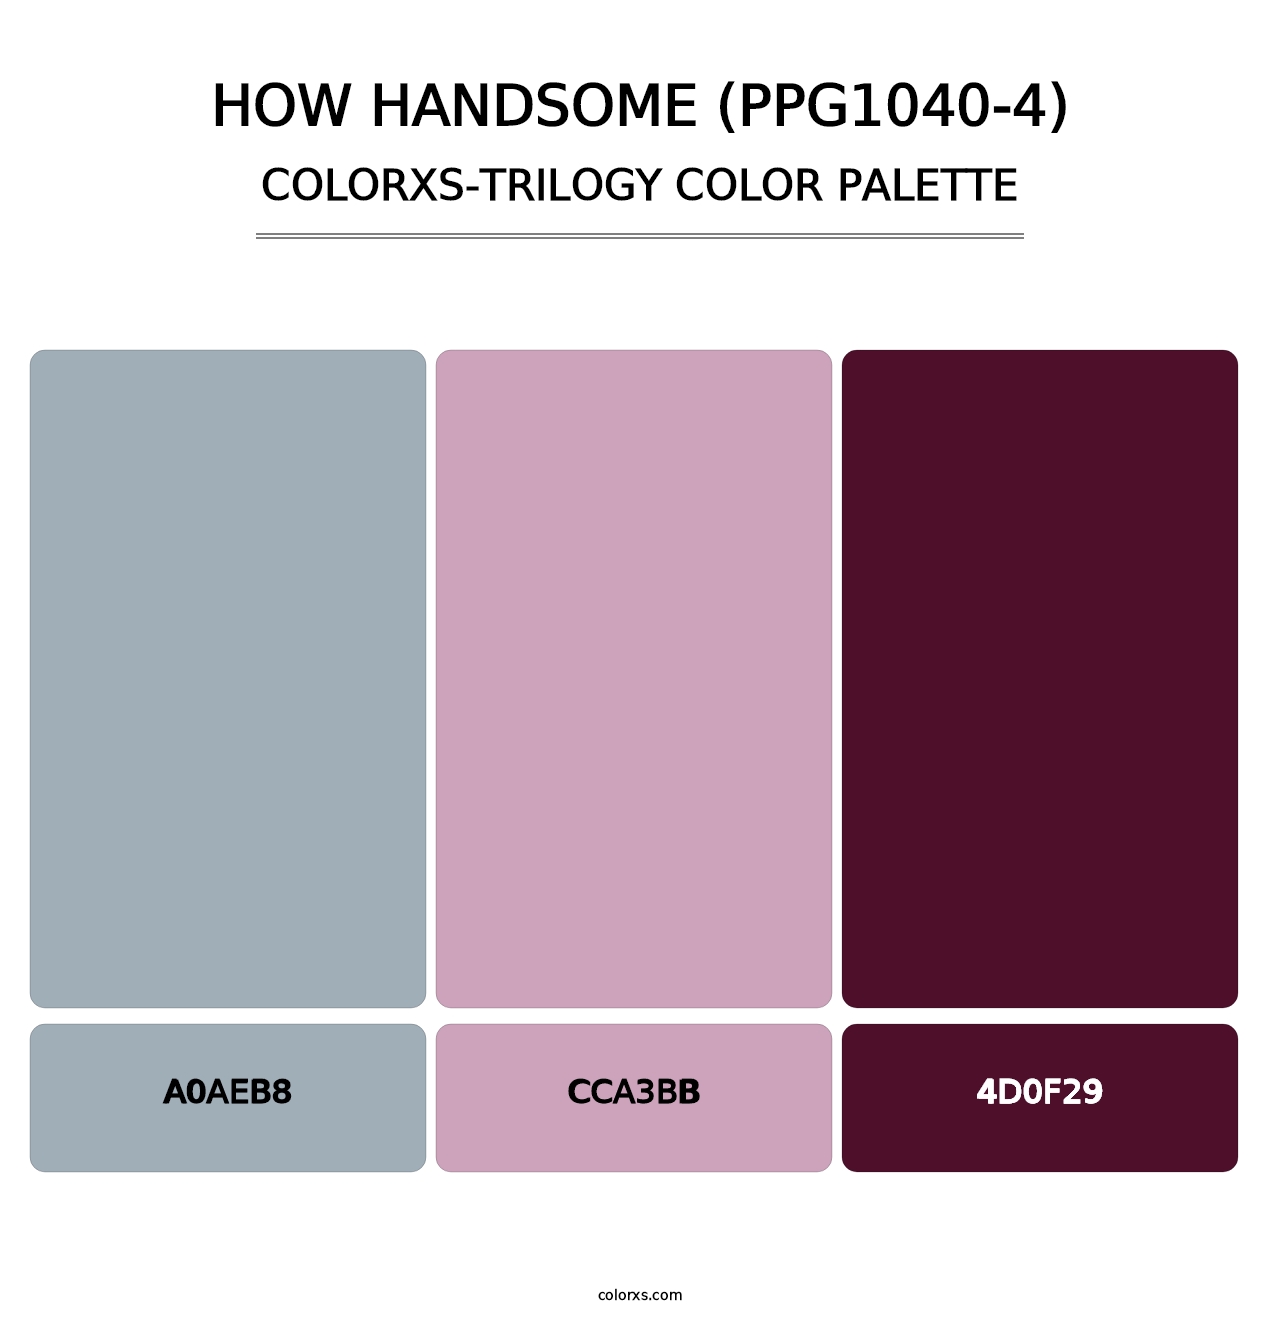 How Handsome (PPG1040-4) - Colorxs Trilogy Palette